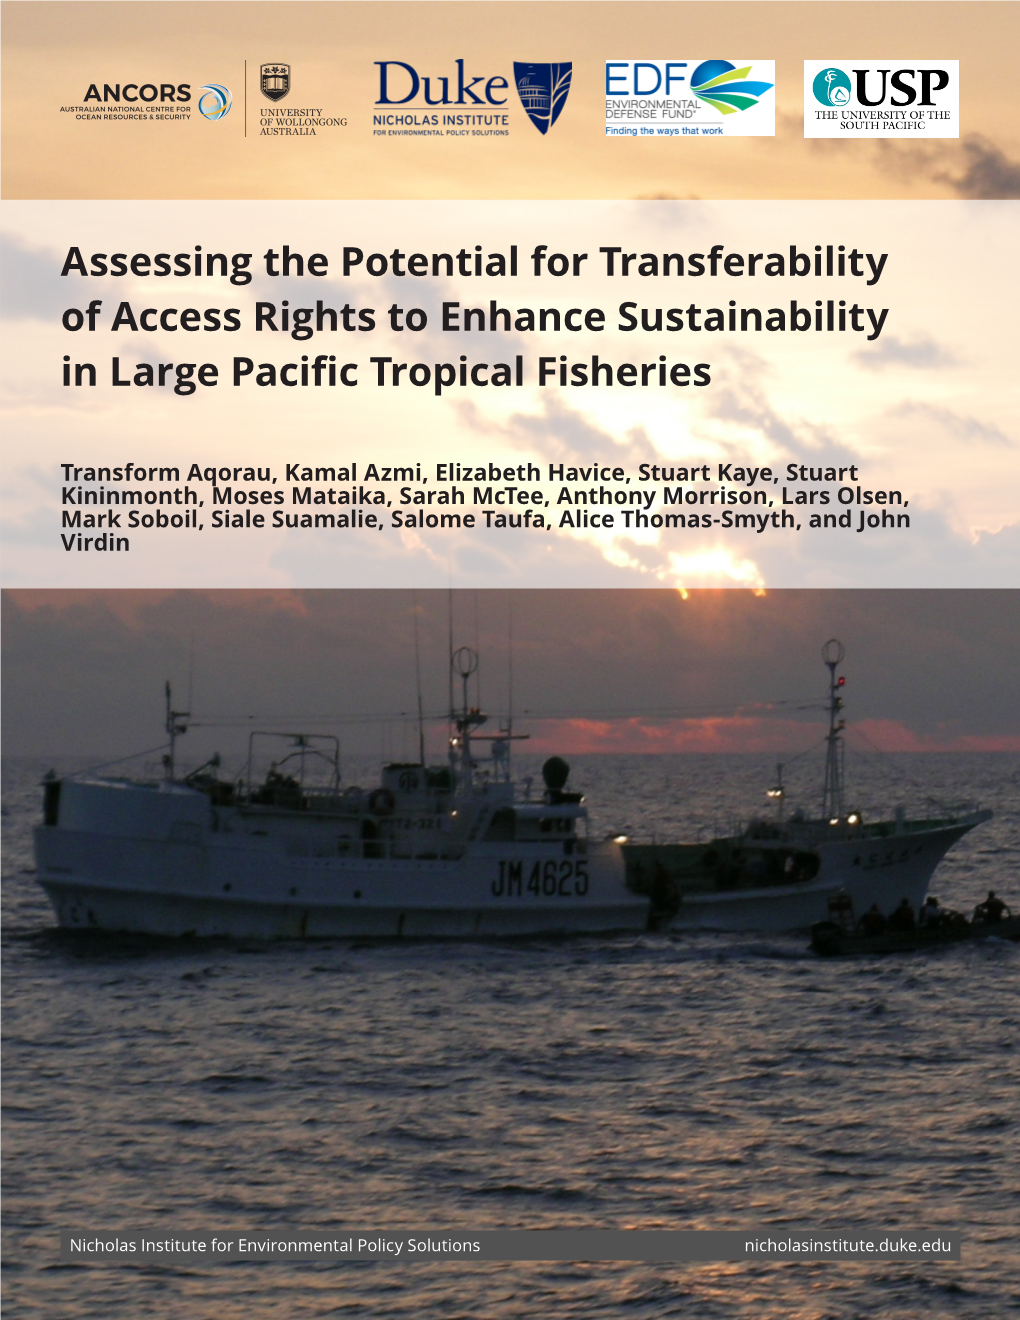 Assessing the Potential for Transferability of Access Rights to Enhance Sustainability in Large Pacific Tropical Fisheries